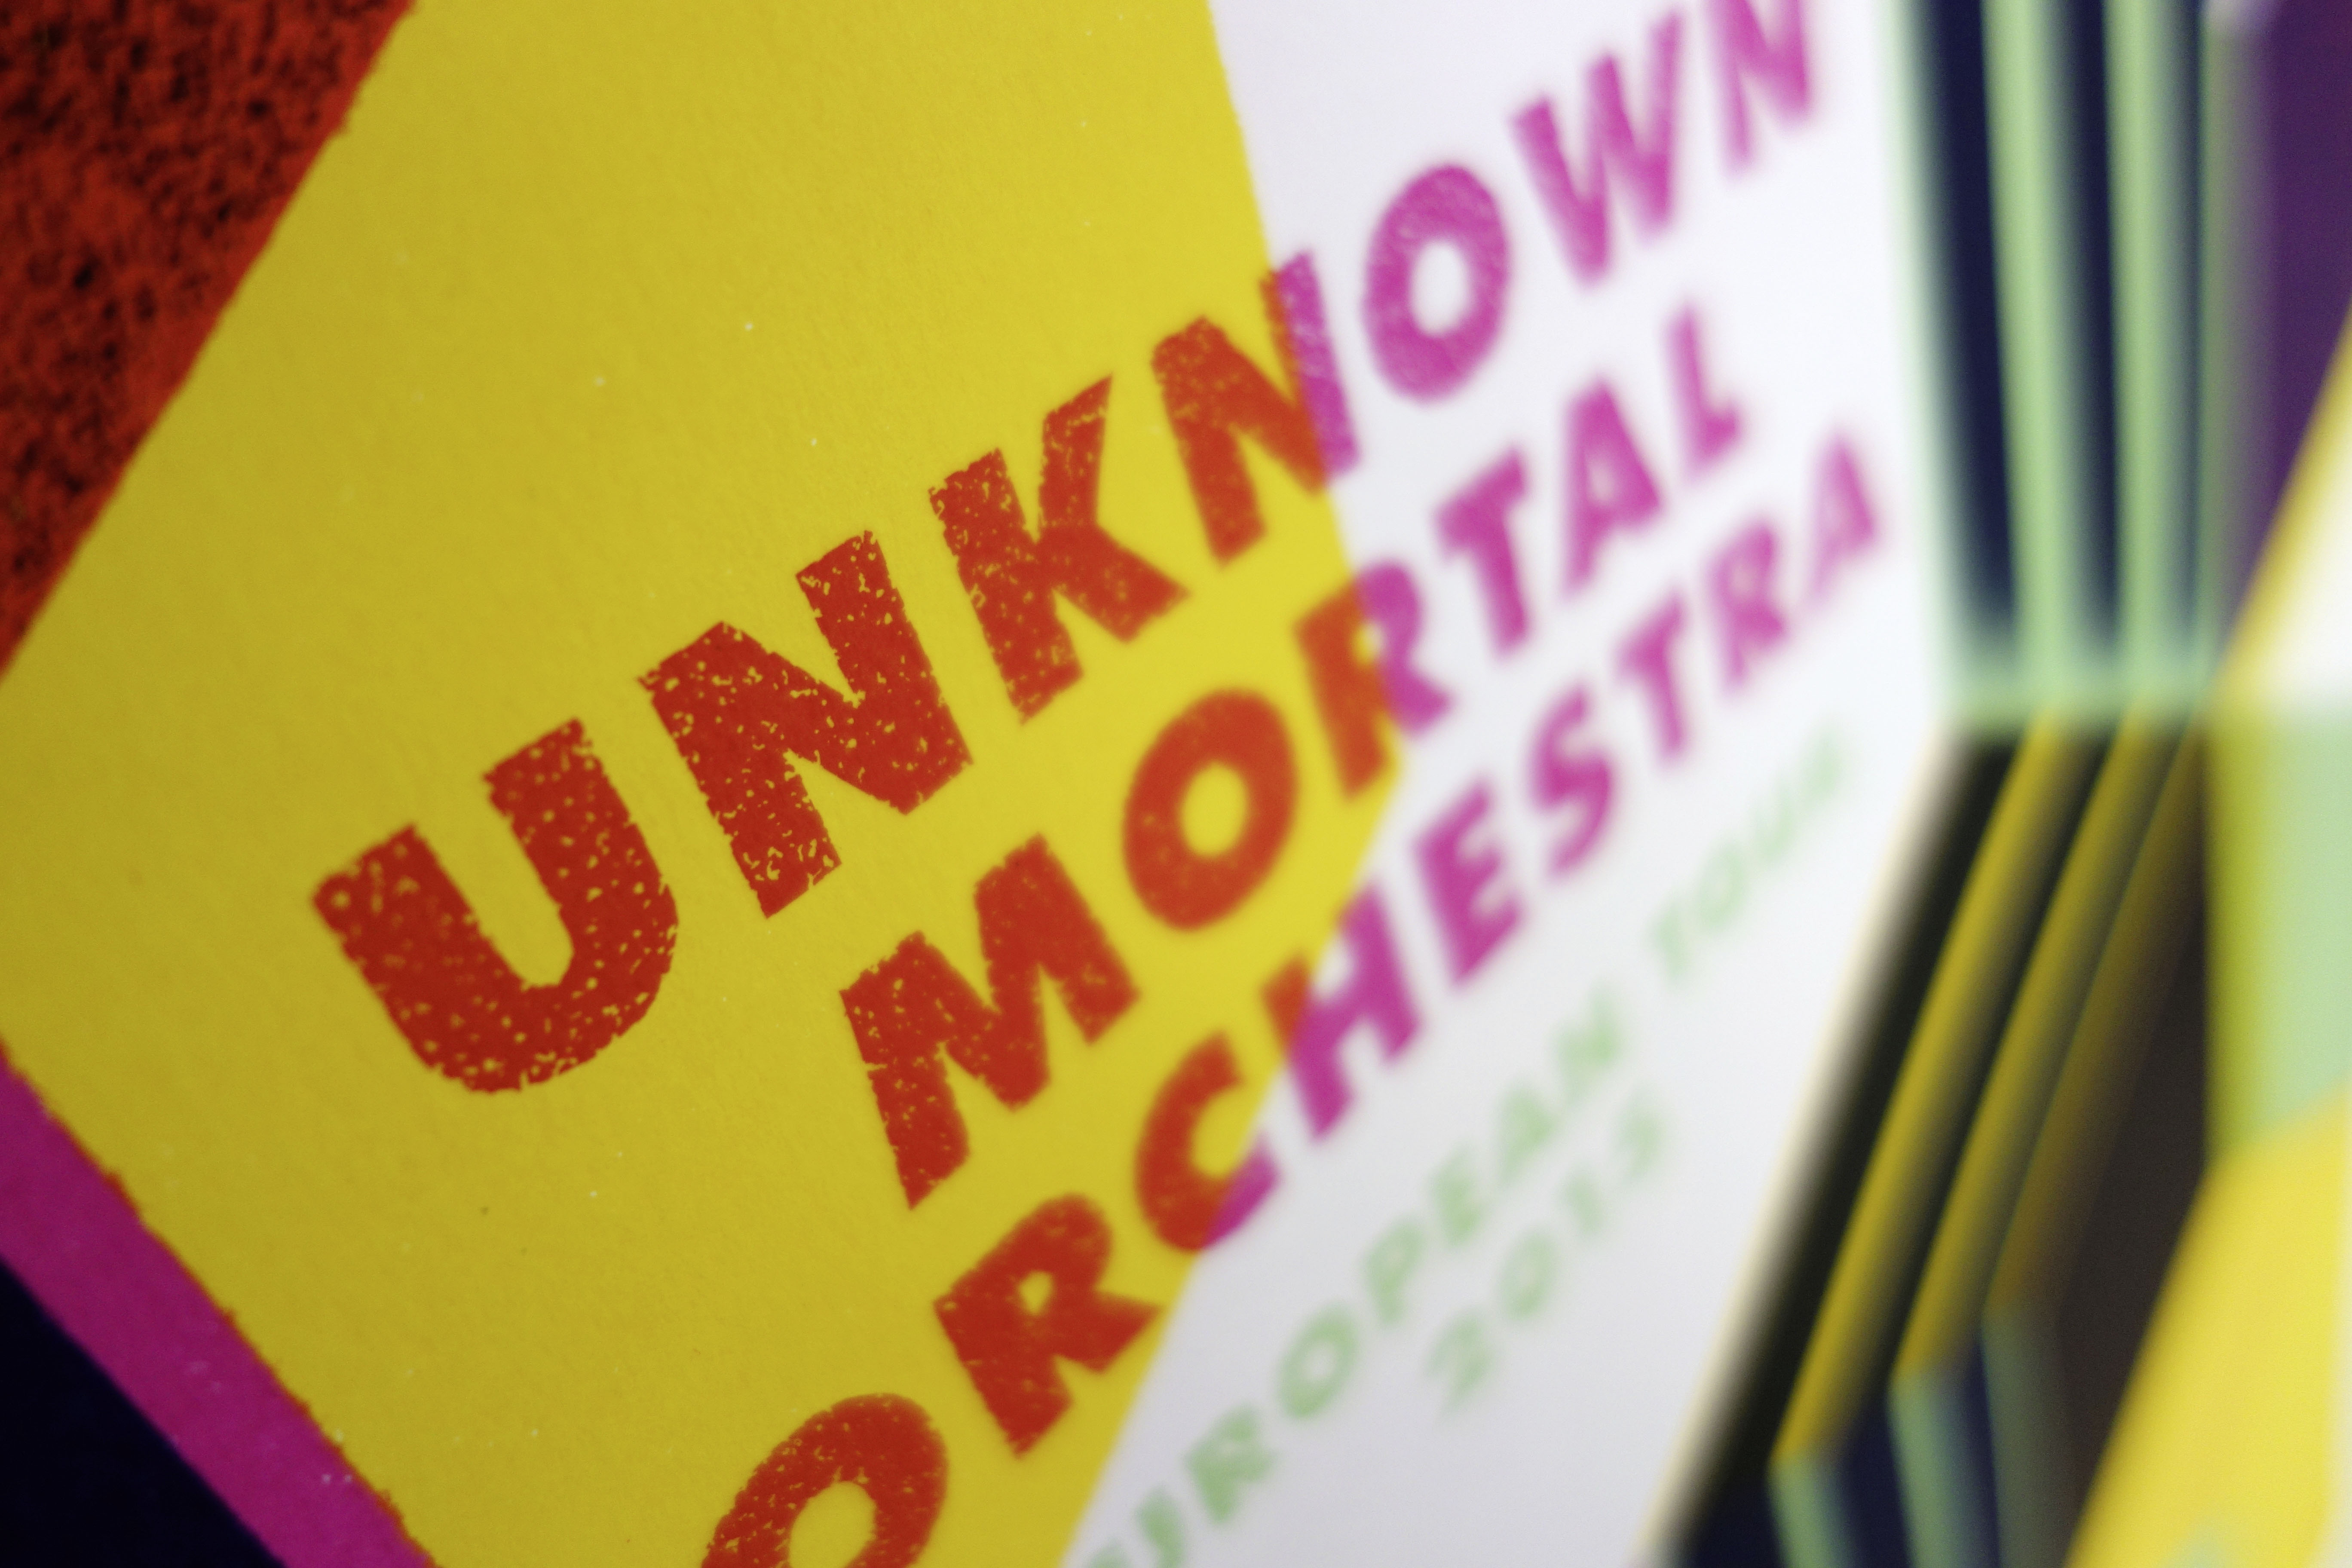 Unknown Mortal Orchestra gigposter detail 03 by Rainbow Posters